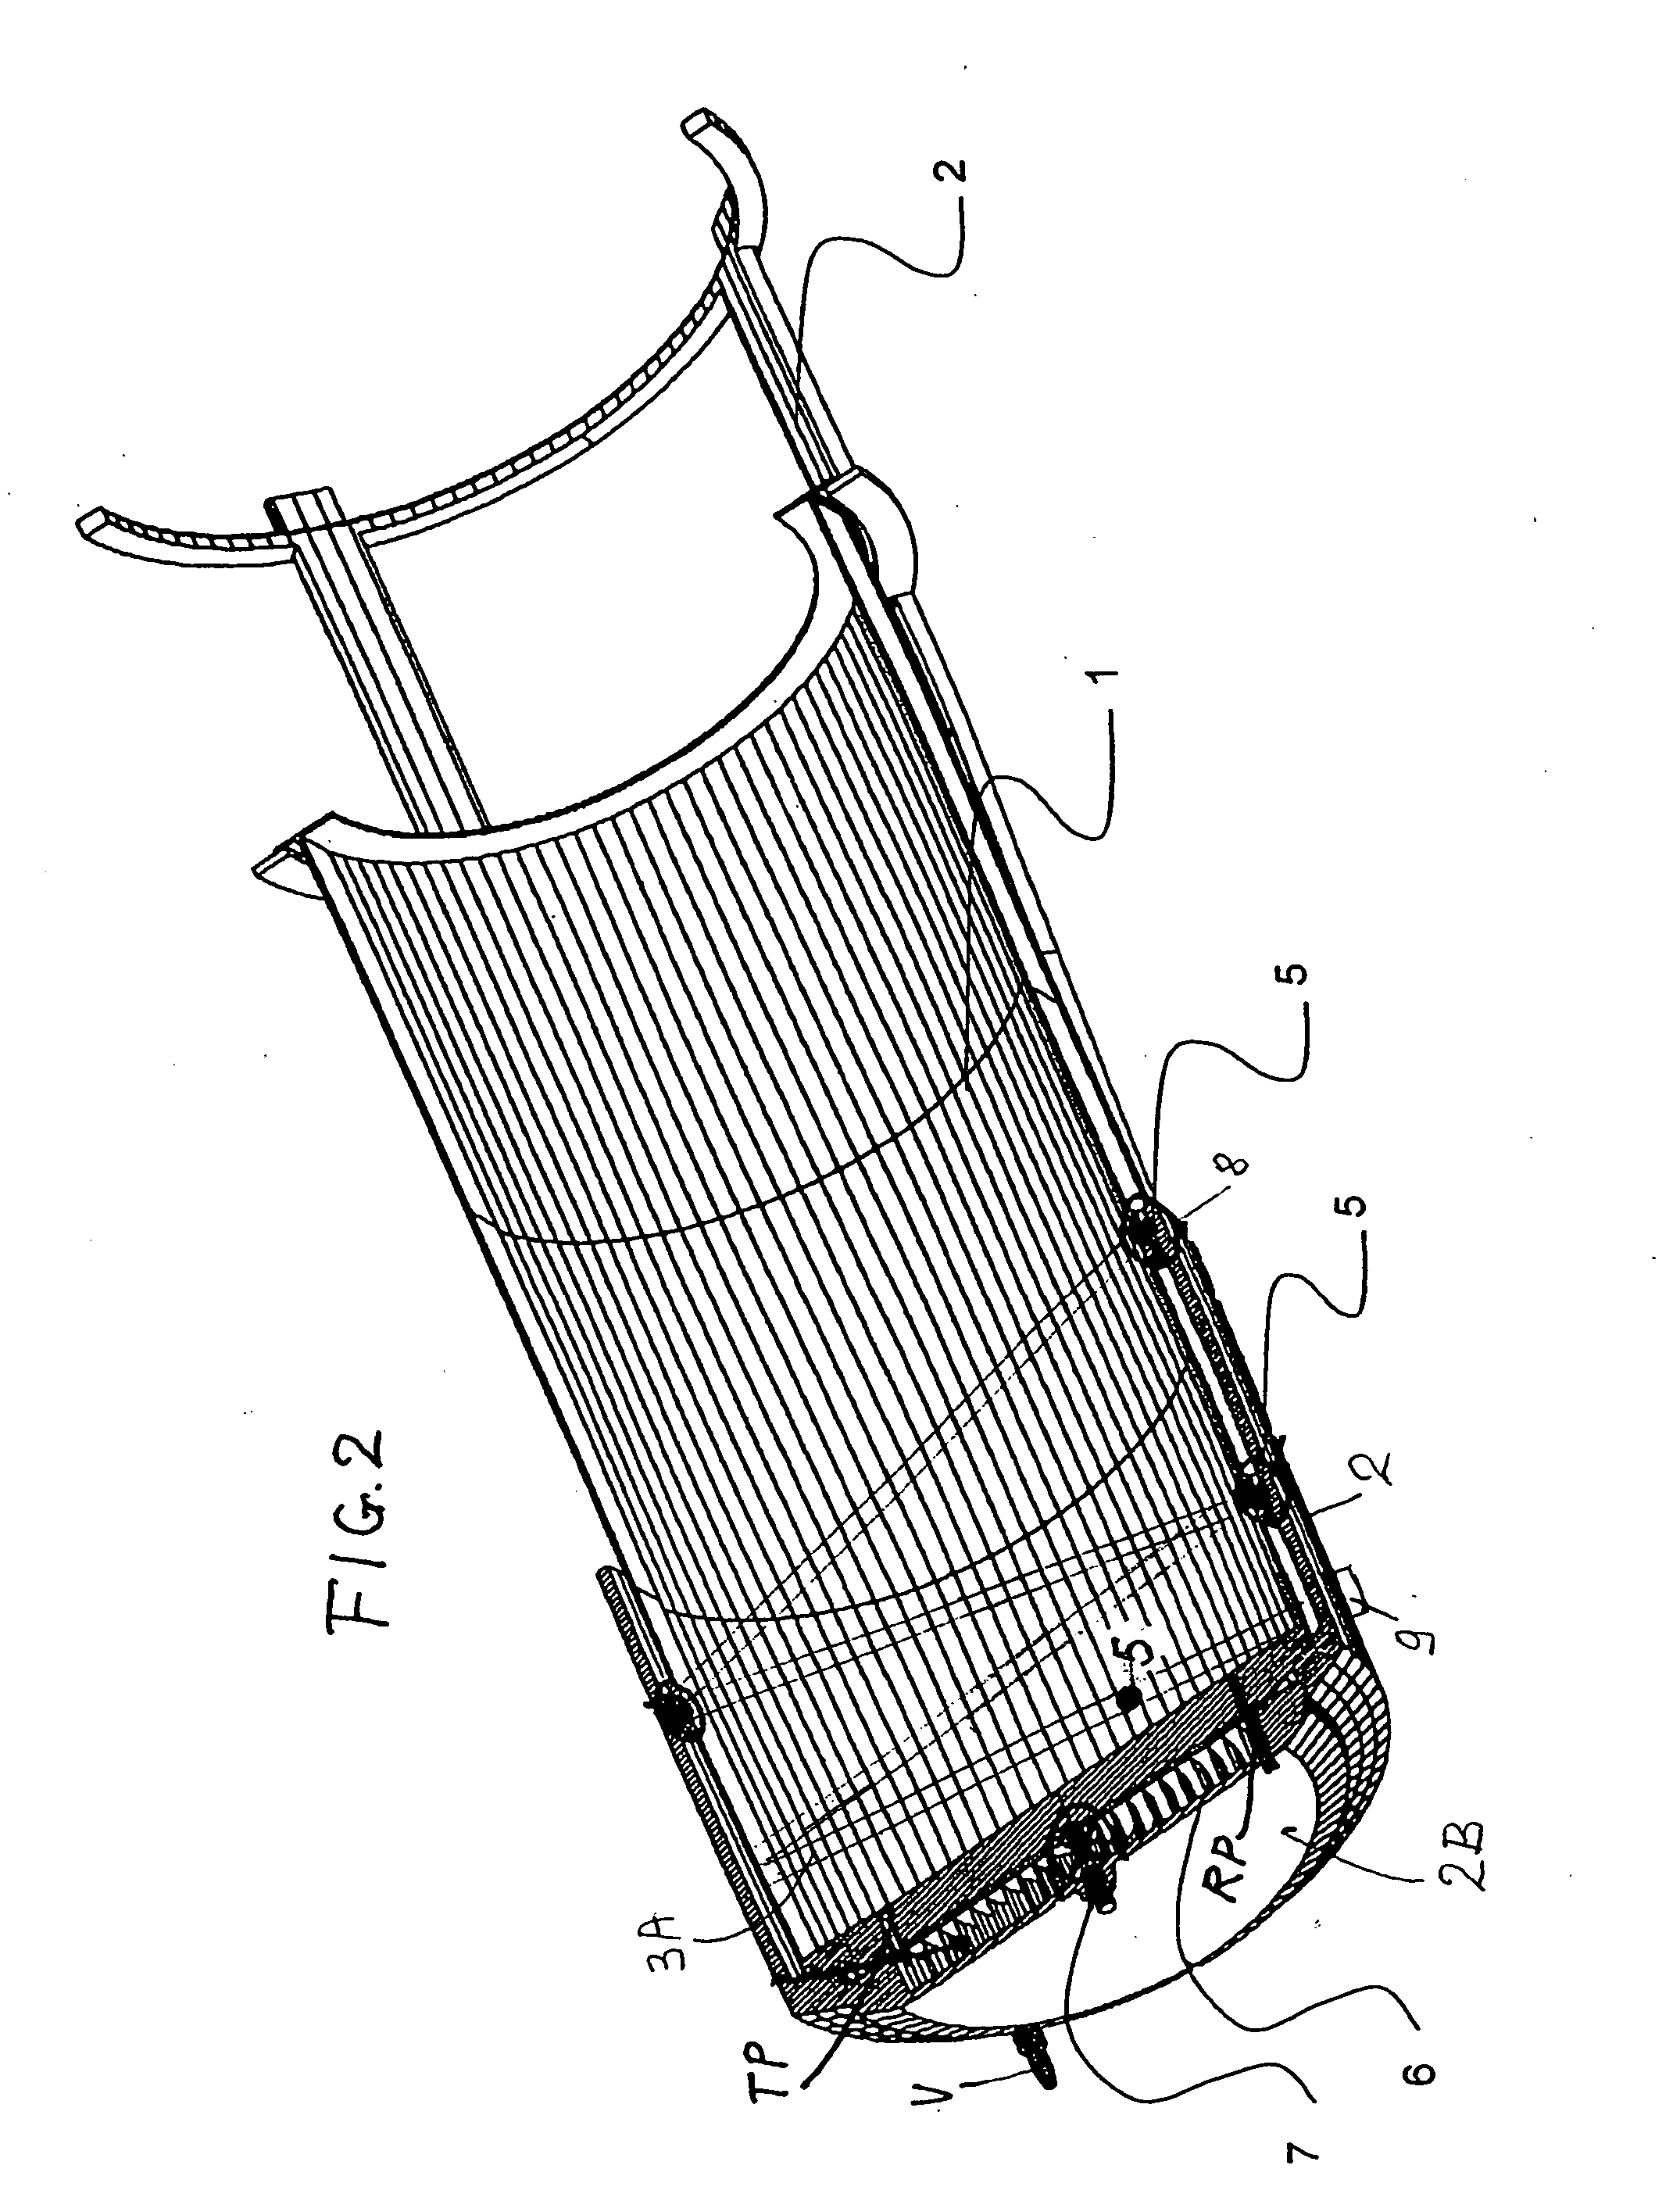 System for ejecting a spin-stabilized space flying body